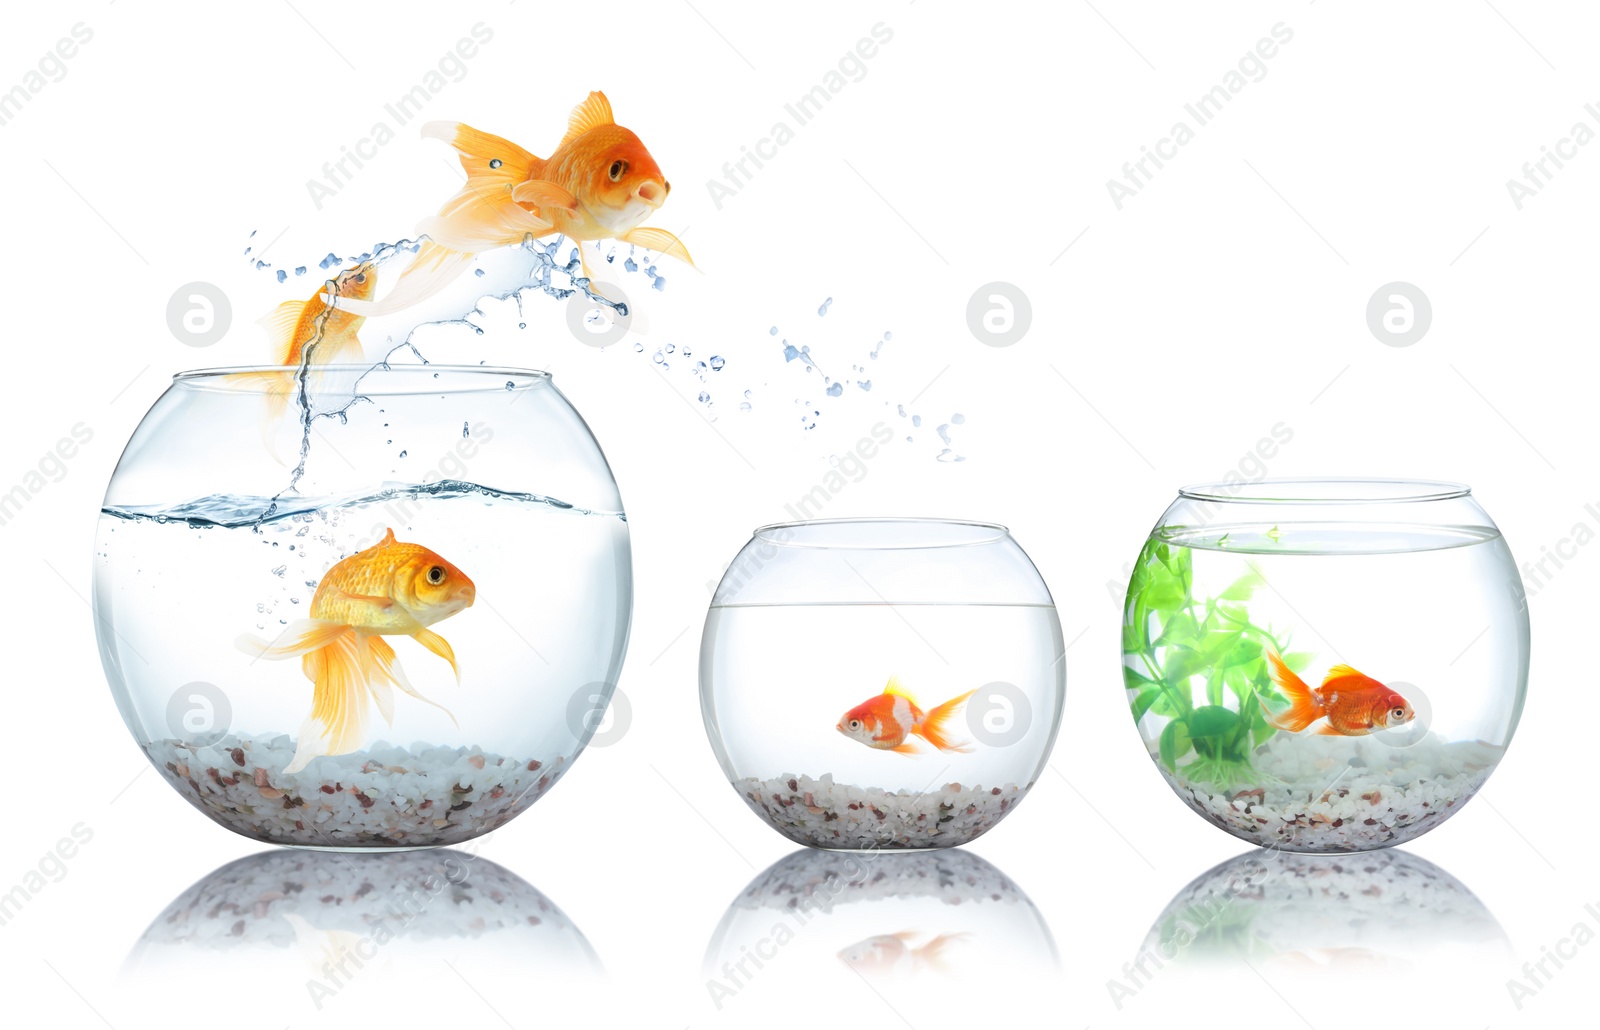 Image of Beautiful bright goldfish jumping out of water on white background